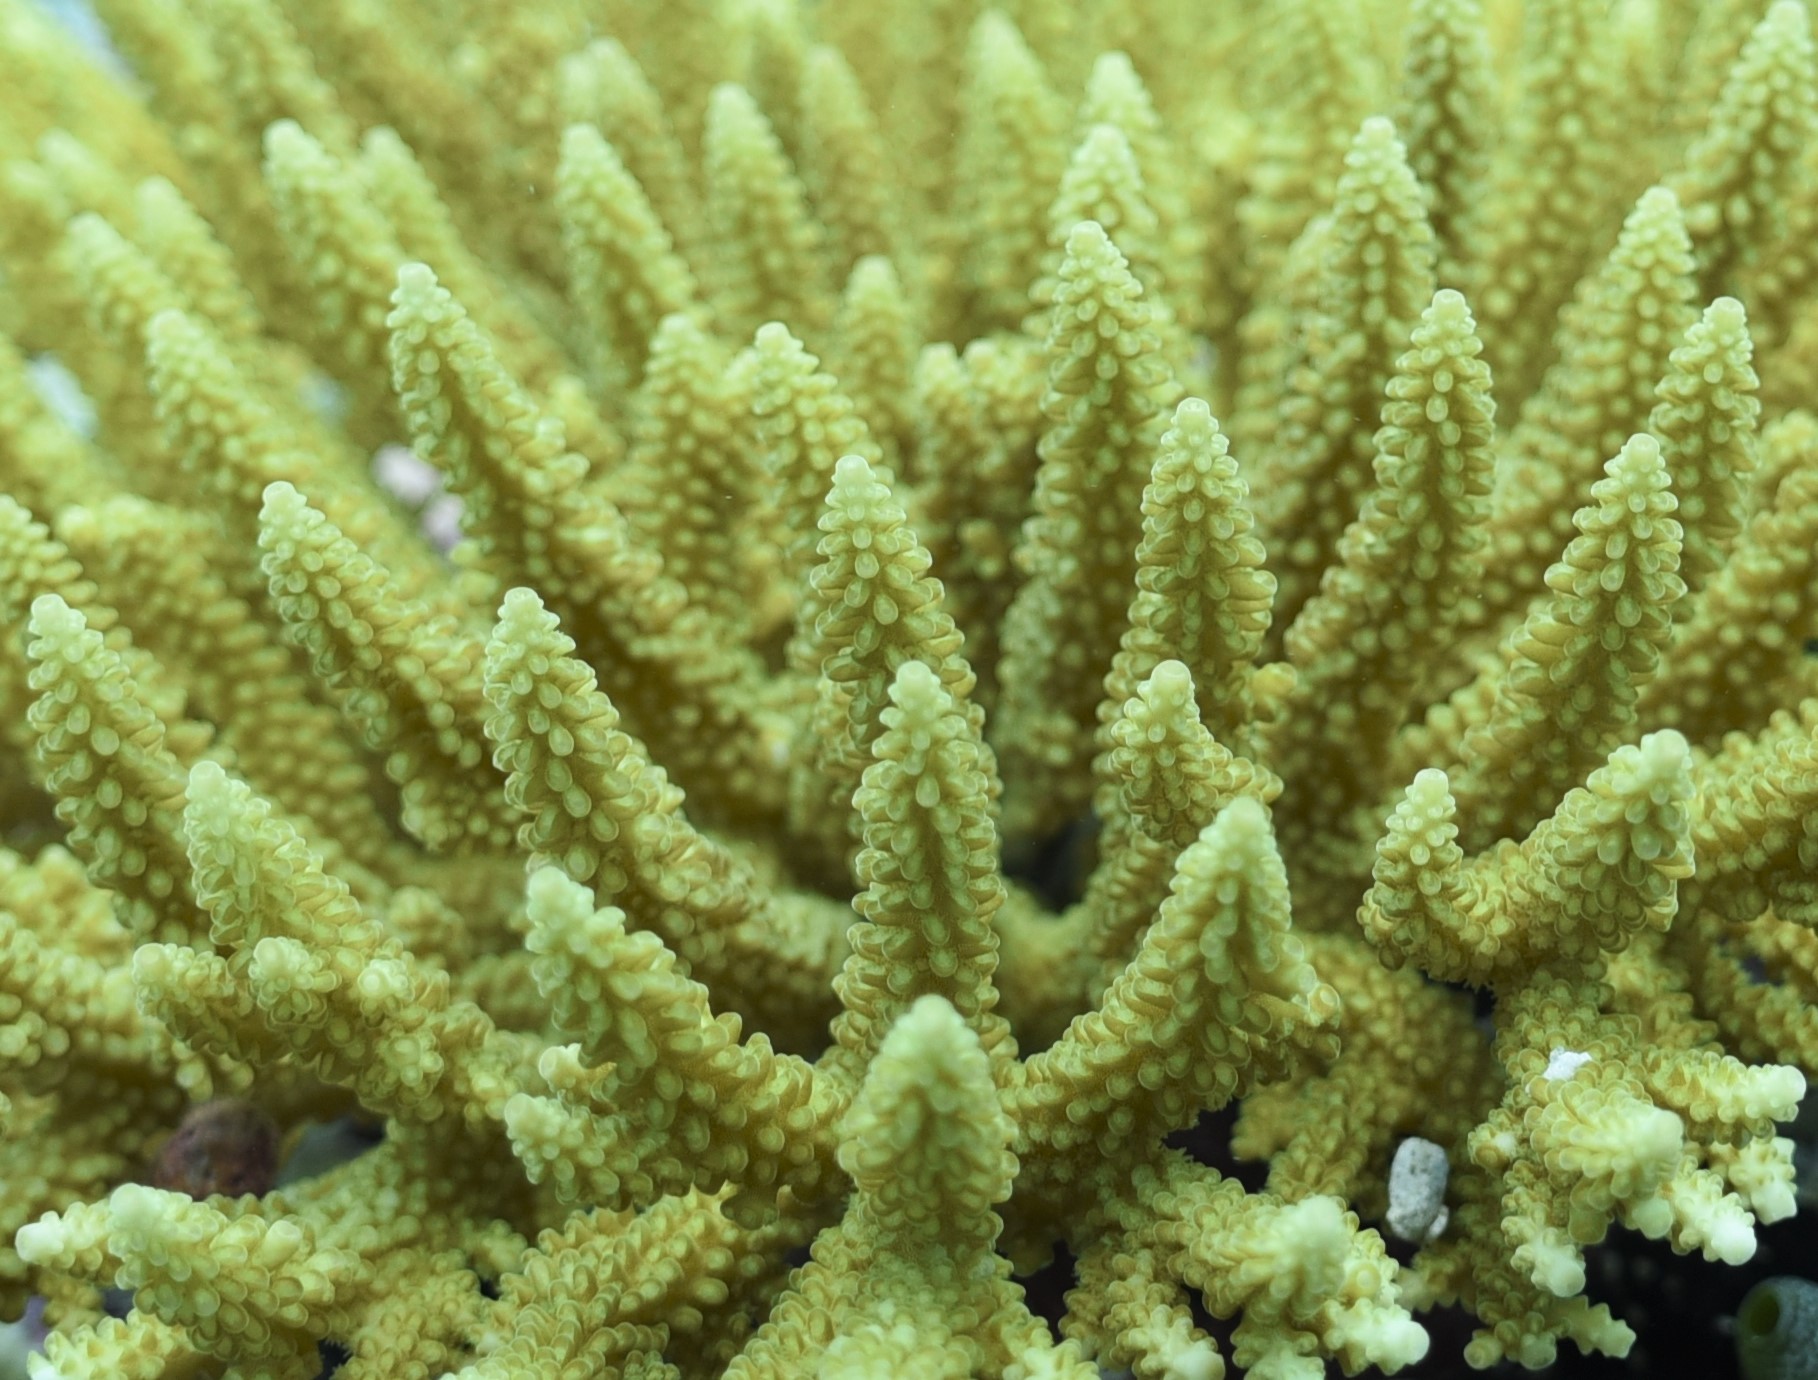 Young corals have grown back after a previous bleaching event in 1998 (ZSL/PA)